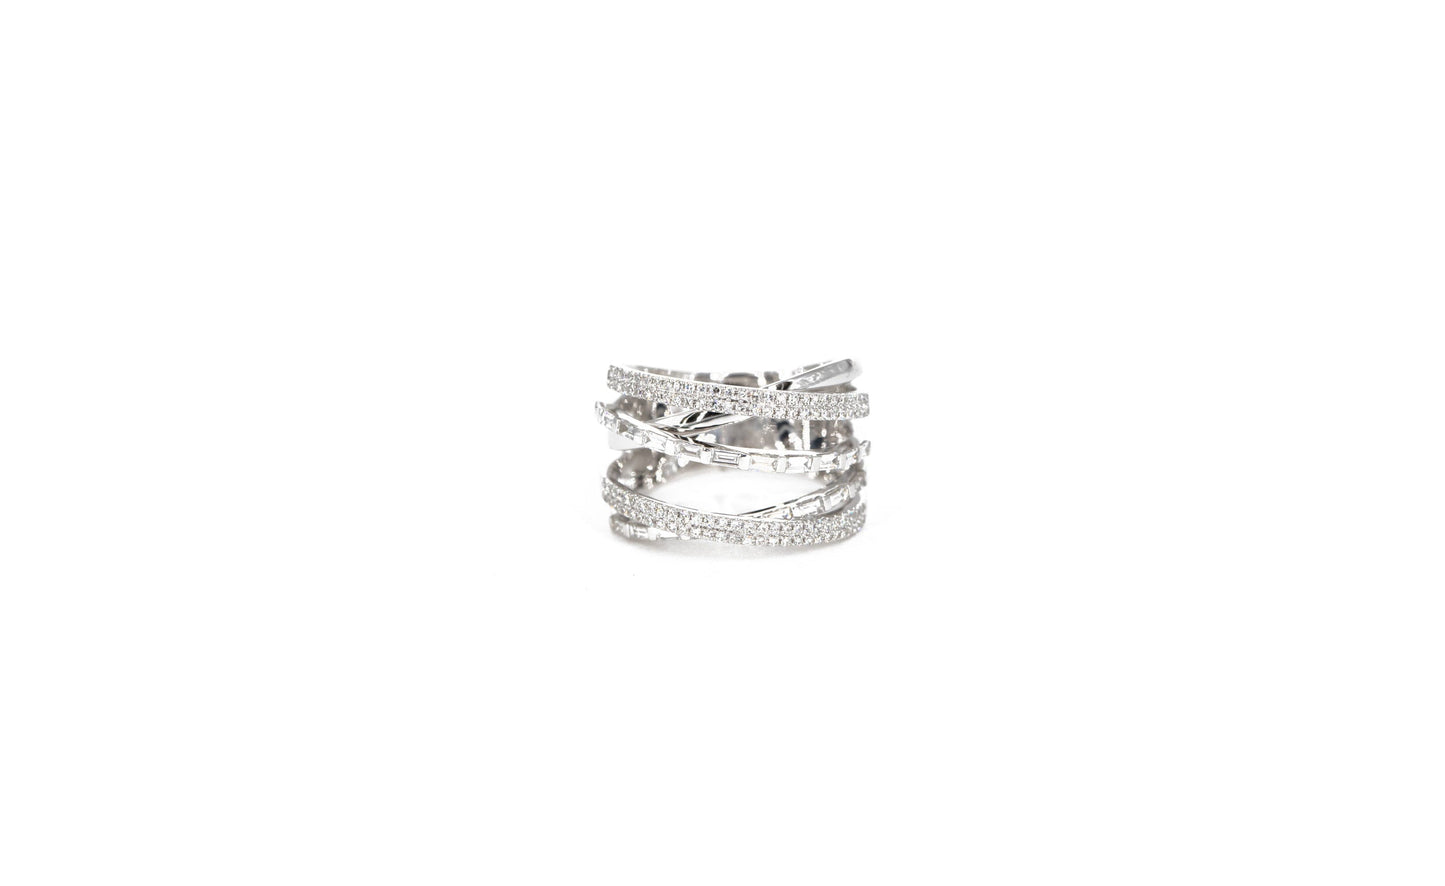 14KT White Gold Diamond Pave and Baguette Ring